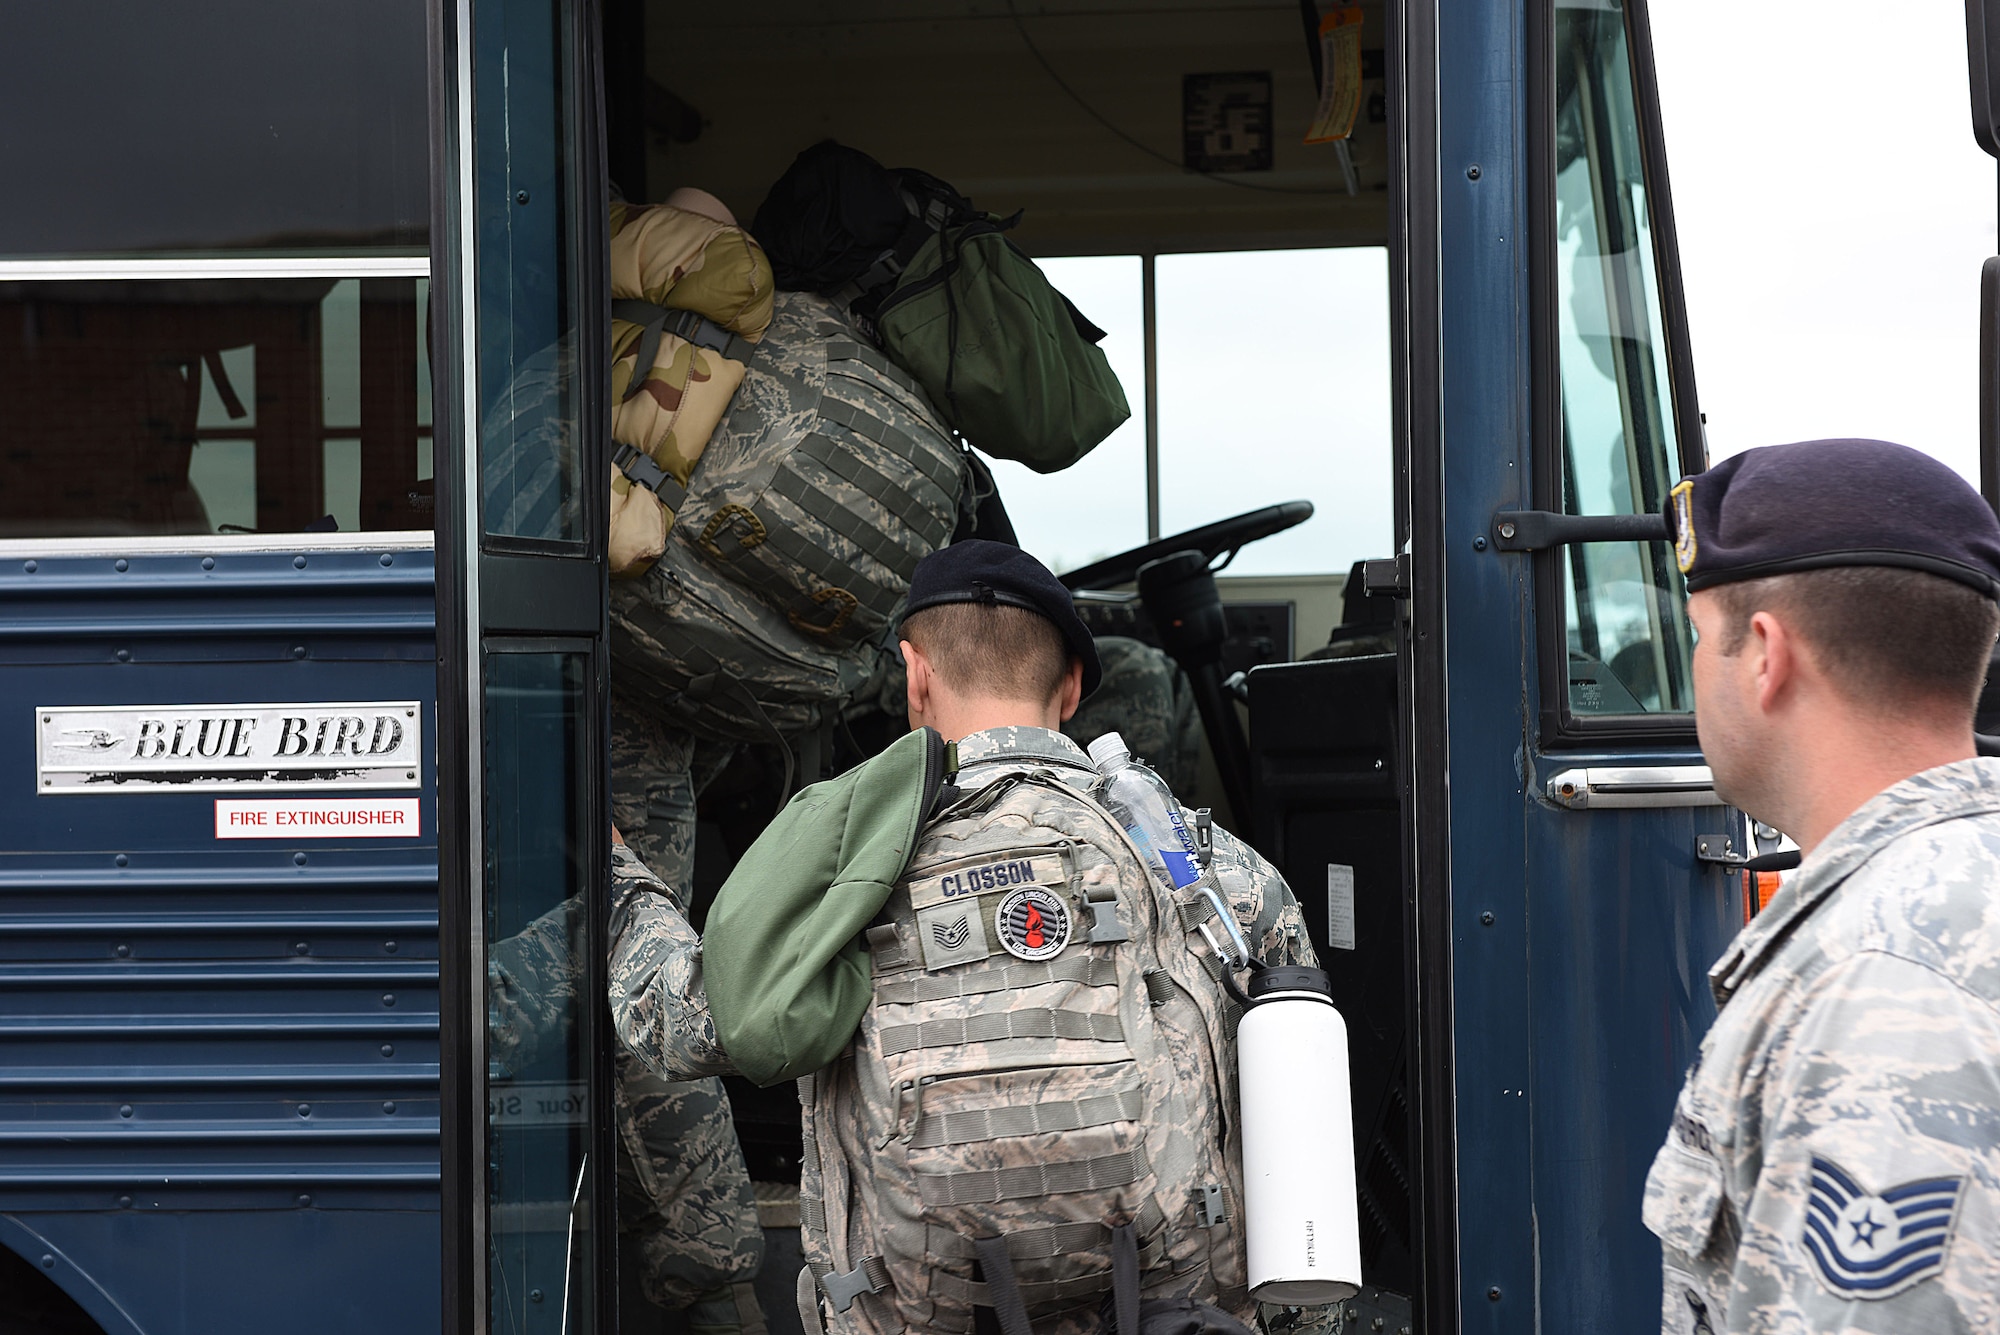 Tech. Sgt. Closson wearing a backpack boards an Air Force bus